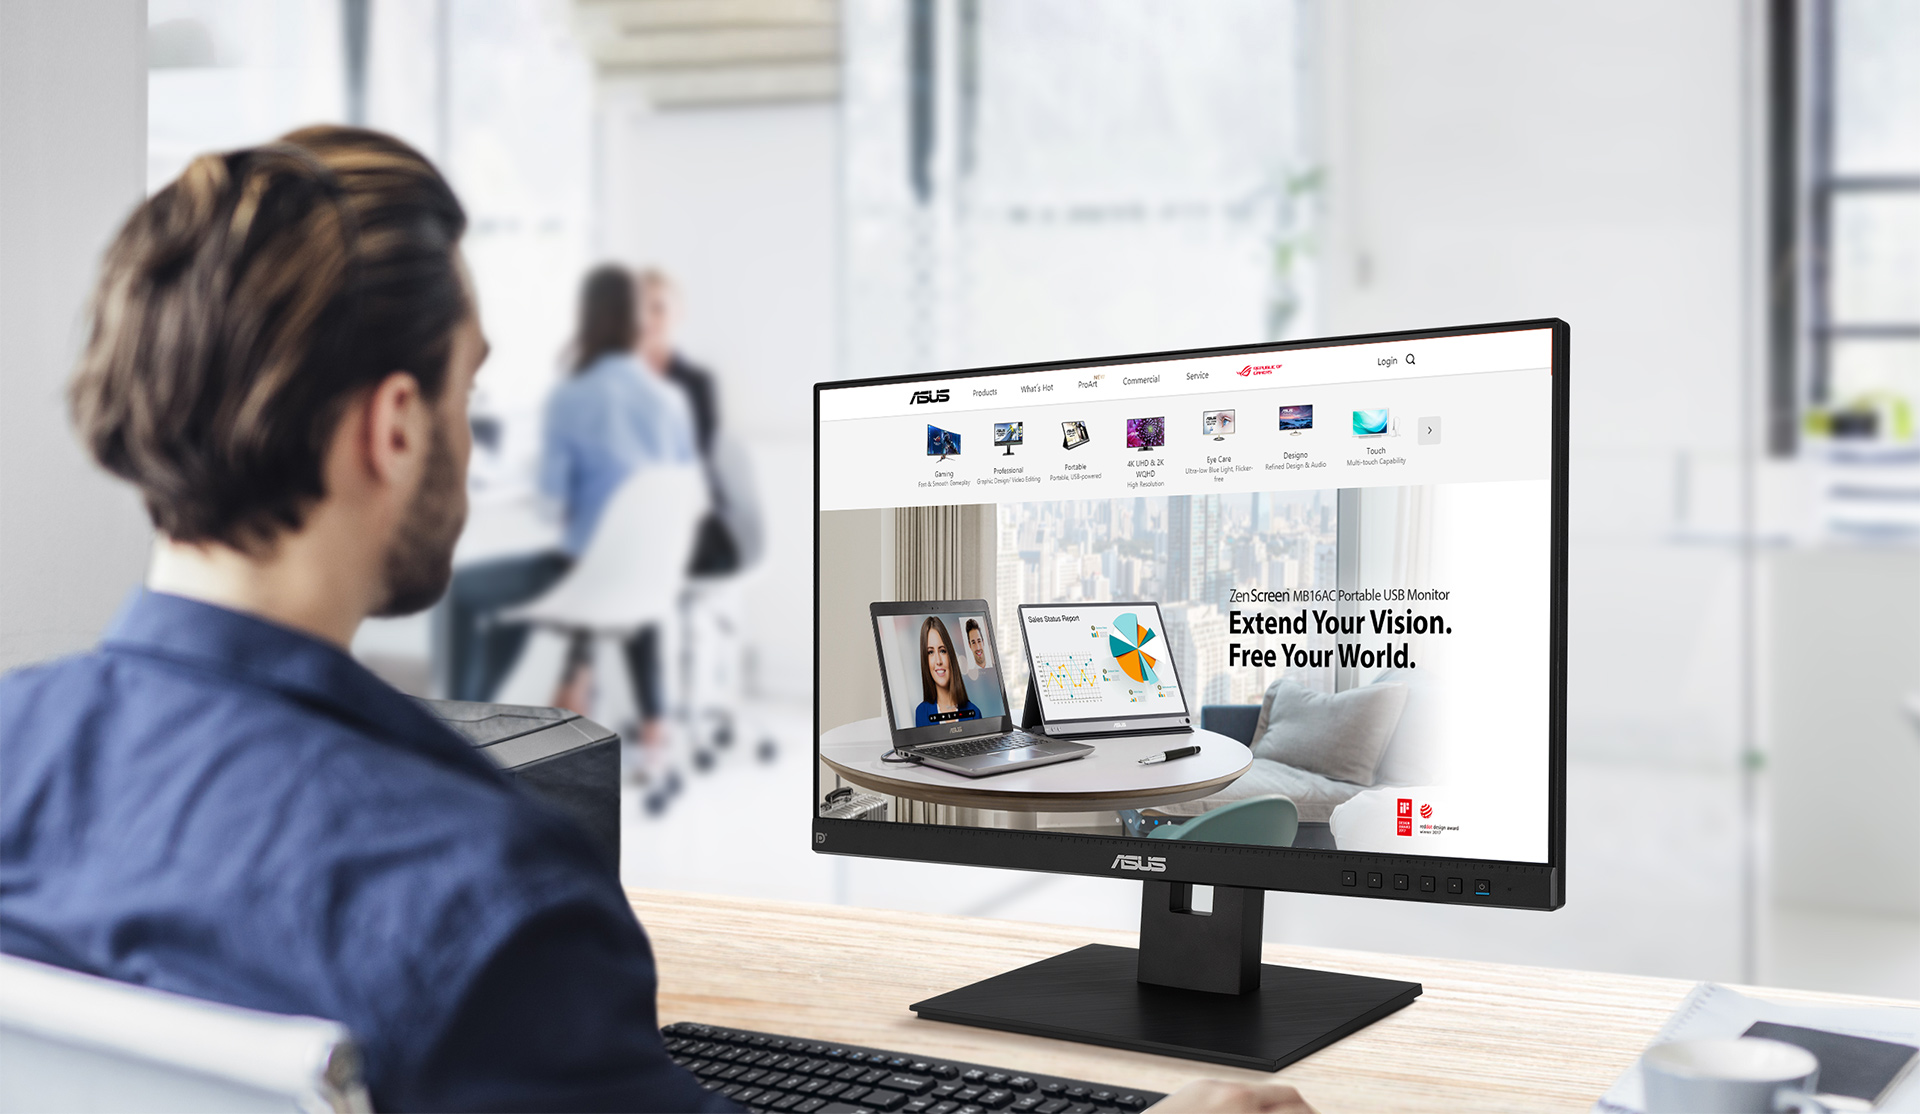 BE24EQSB is a 23.8-inch Full HD monitor that features an integrated Full HD (2MP) webcam, microphone array and stereo speakers for video conferencing and live-streaming.